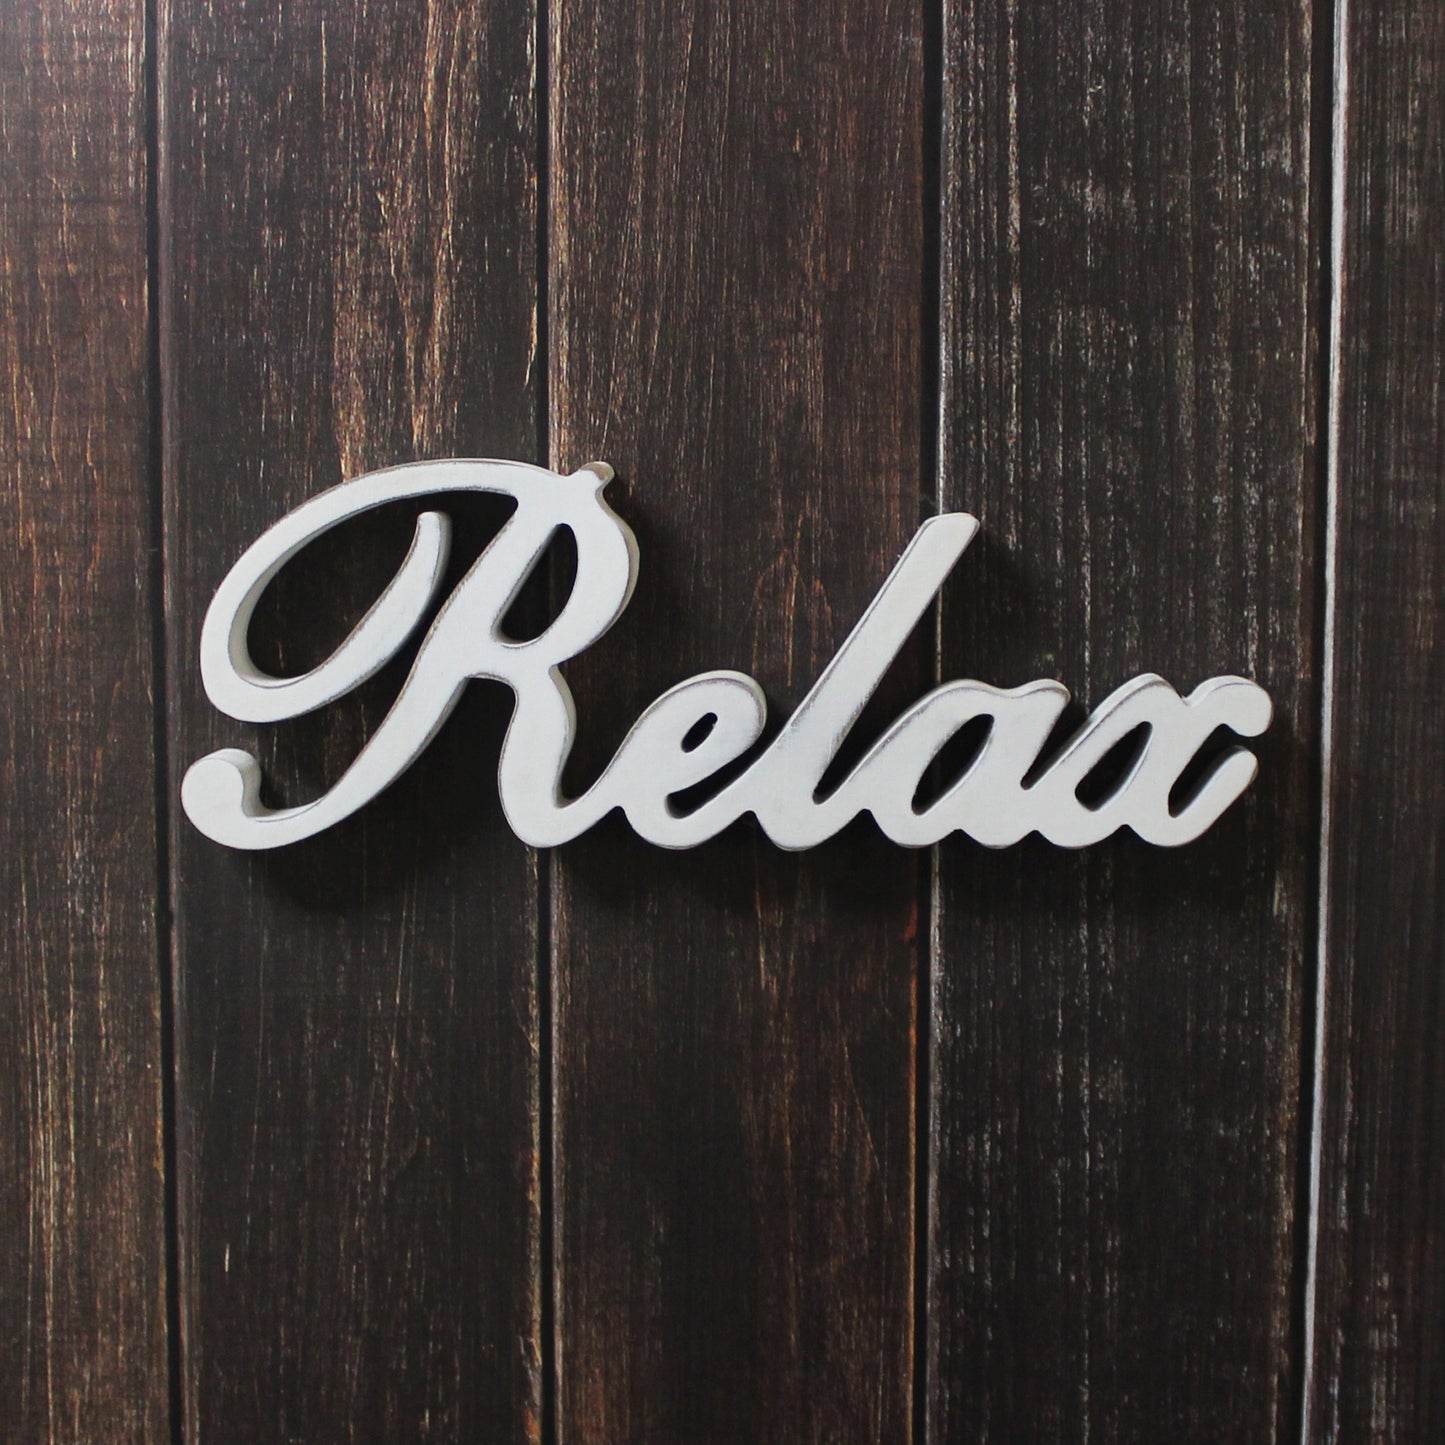 CVHOMEDECO. Rustic Vintage Distressed White Wooden Words Sign Free Standing "Relax" Tabletop/Shelf/Home Wall/Office Decoration Art, 12 x 4.25 x 1 Inch